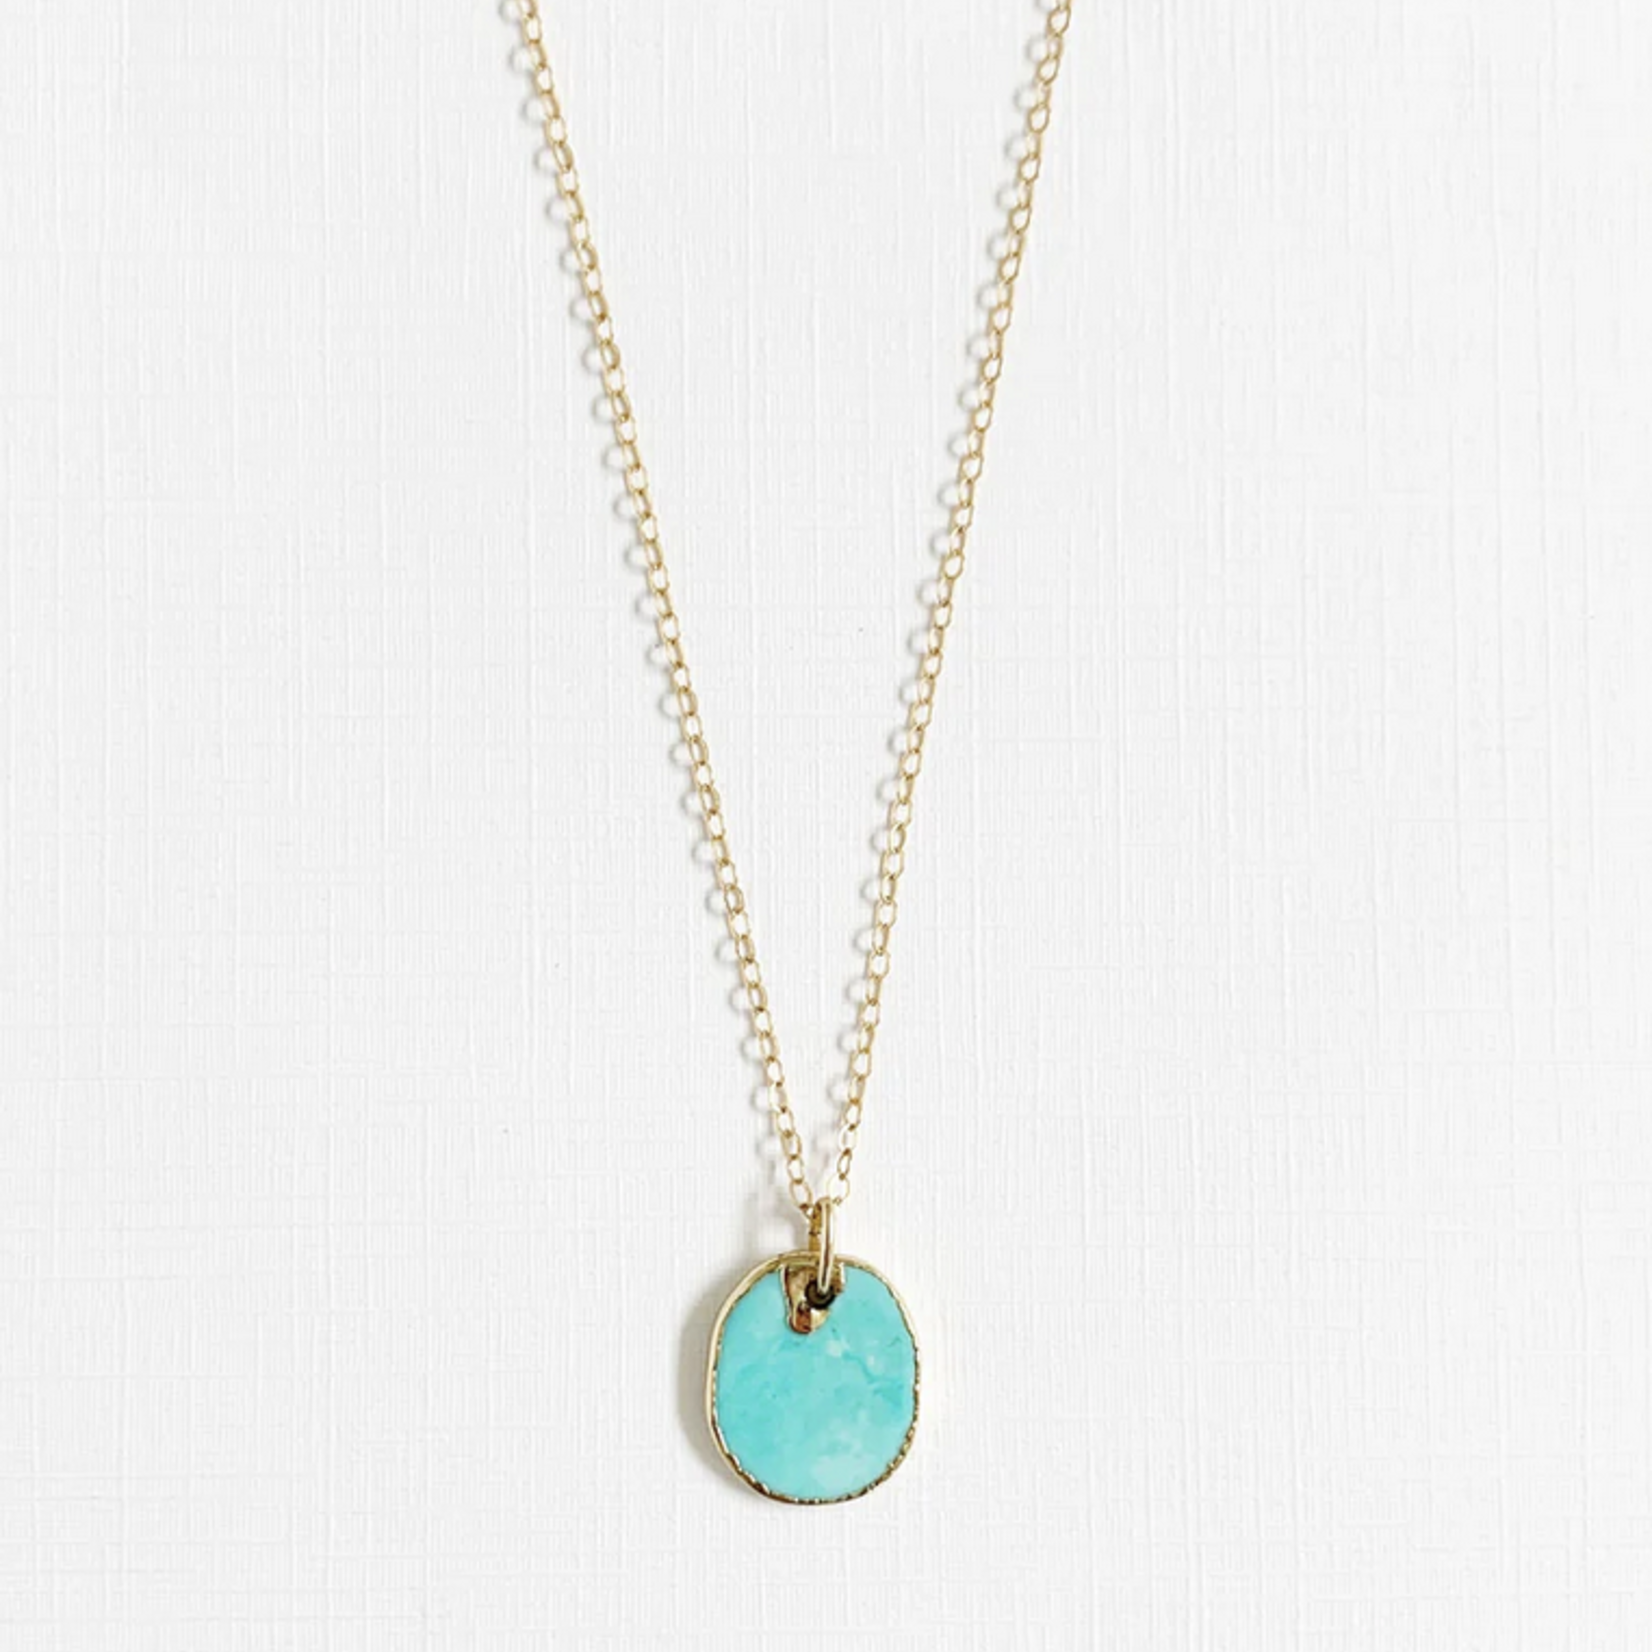 True By Kristy True By Kristy - Gold Filled Necklace - Free Spirit Turquoise